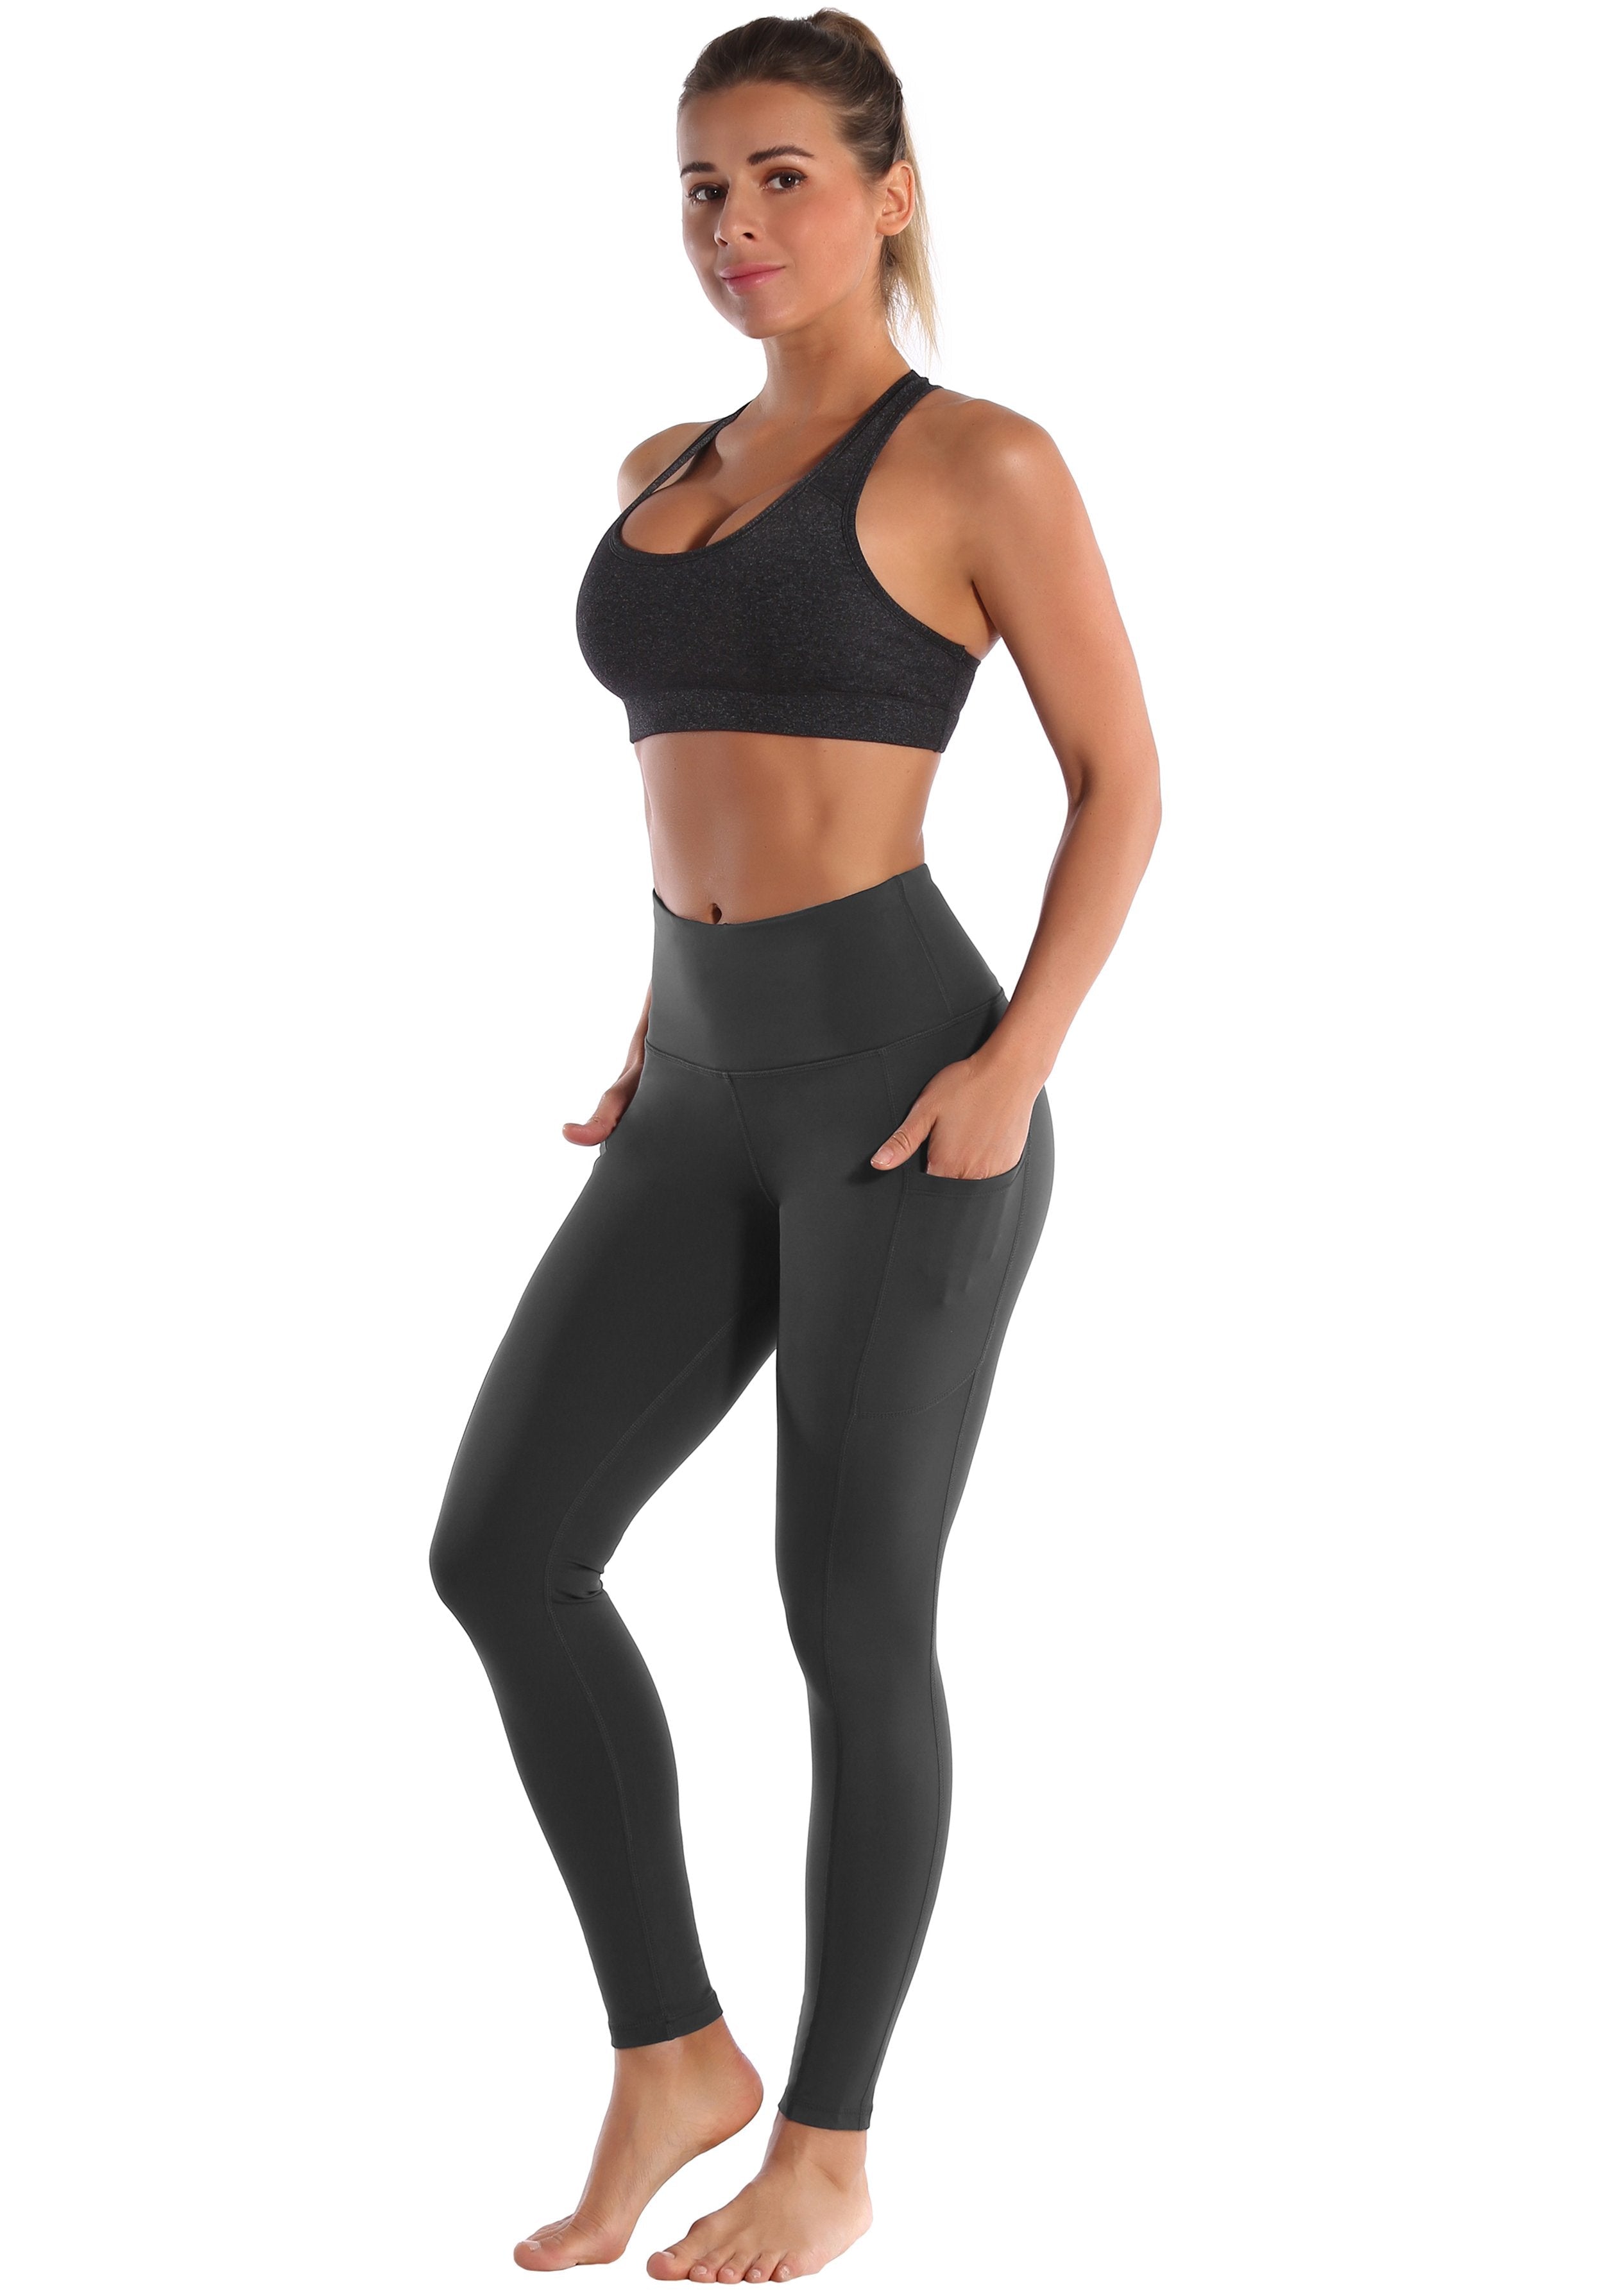 Hip Line Side Pockets yogastudio Pants shadowcharcoal Sexy Hip Line Side Pockets 75%Nylon/25%Spandex Fabric doesn't attract lint easily 4-way stretch No see-through Moisture-wicking Tummy control Inner pocket Two lengths